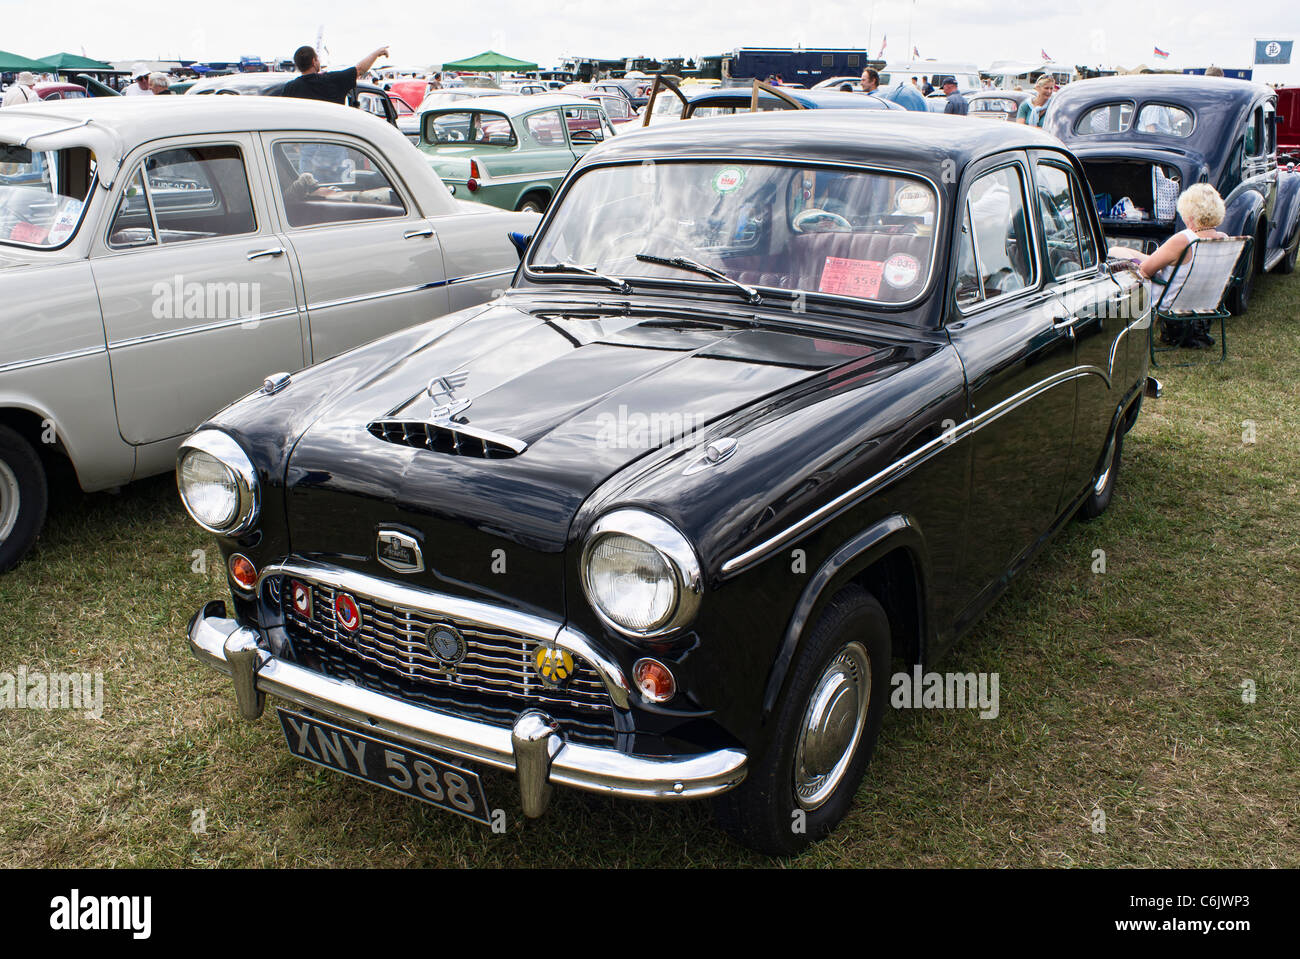 1950s Austin A55 saloon car at an English show in 2010 Stock Photo